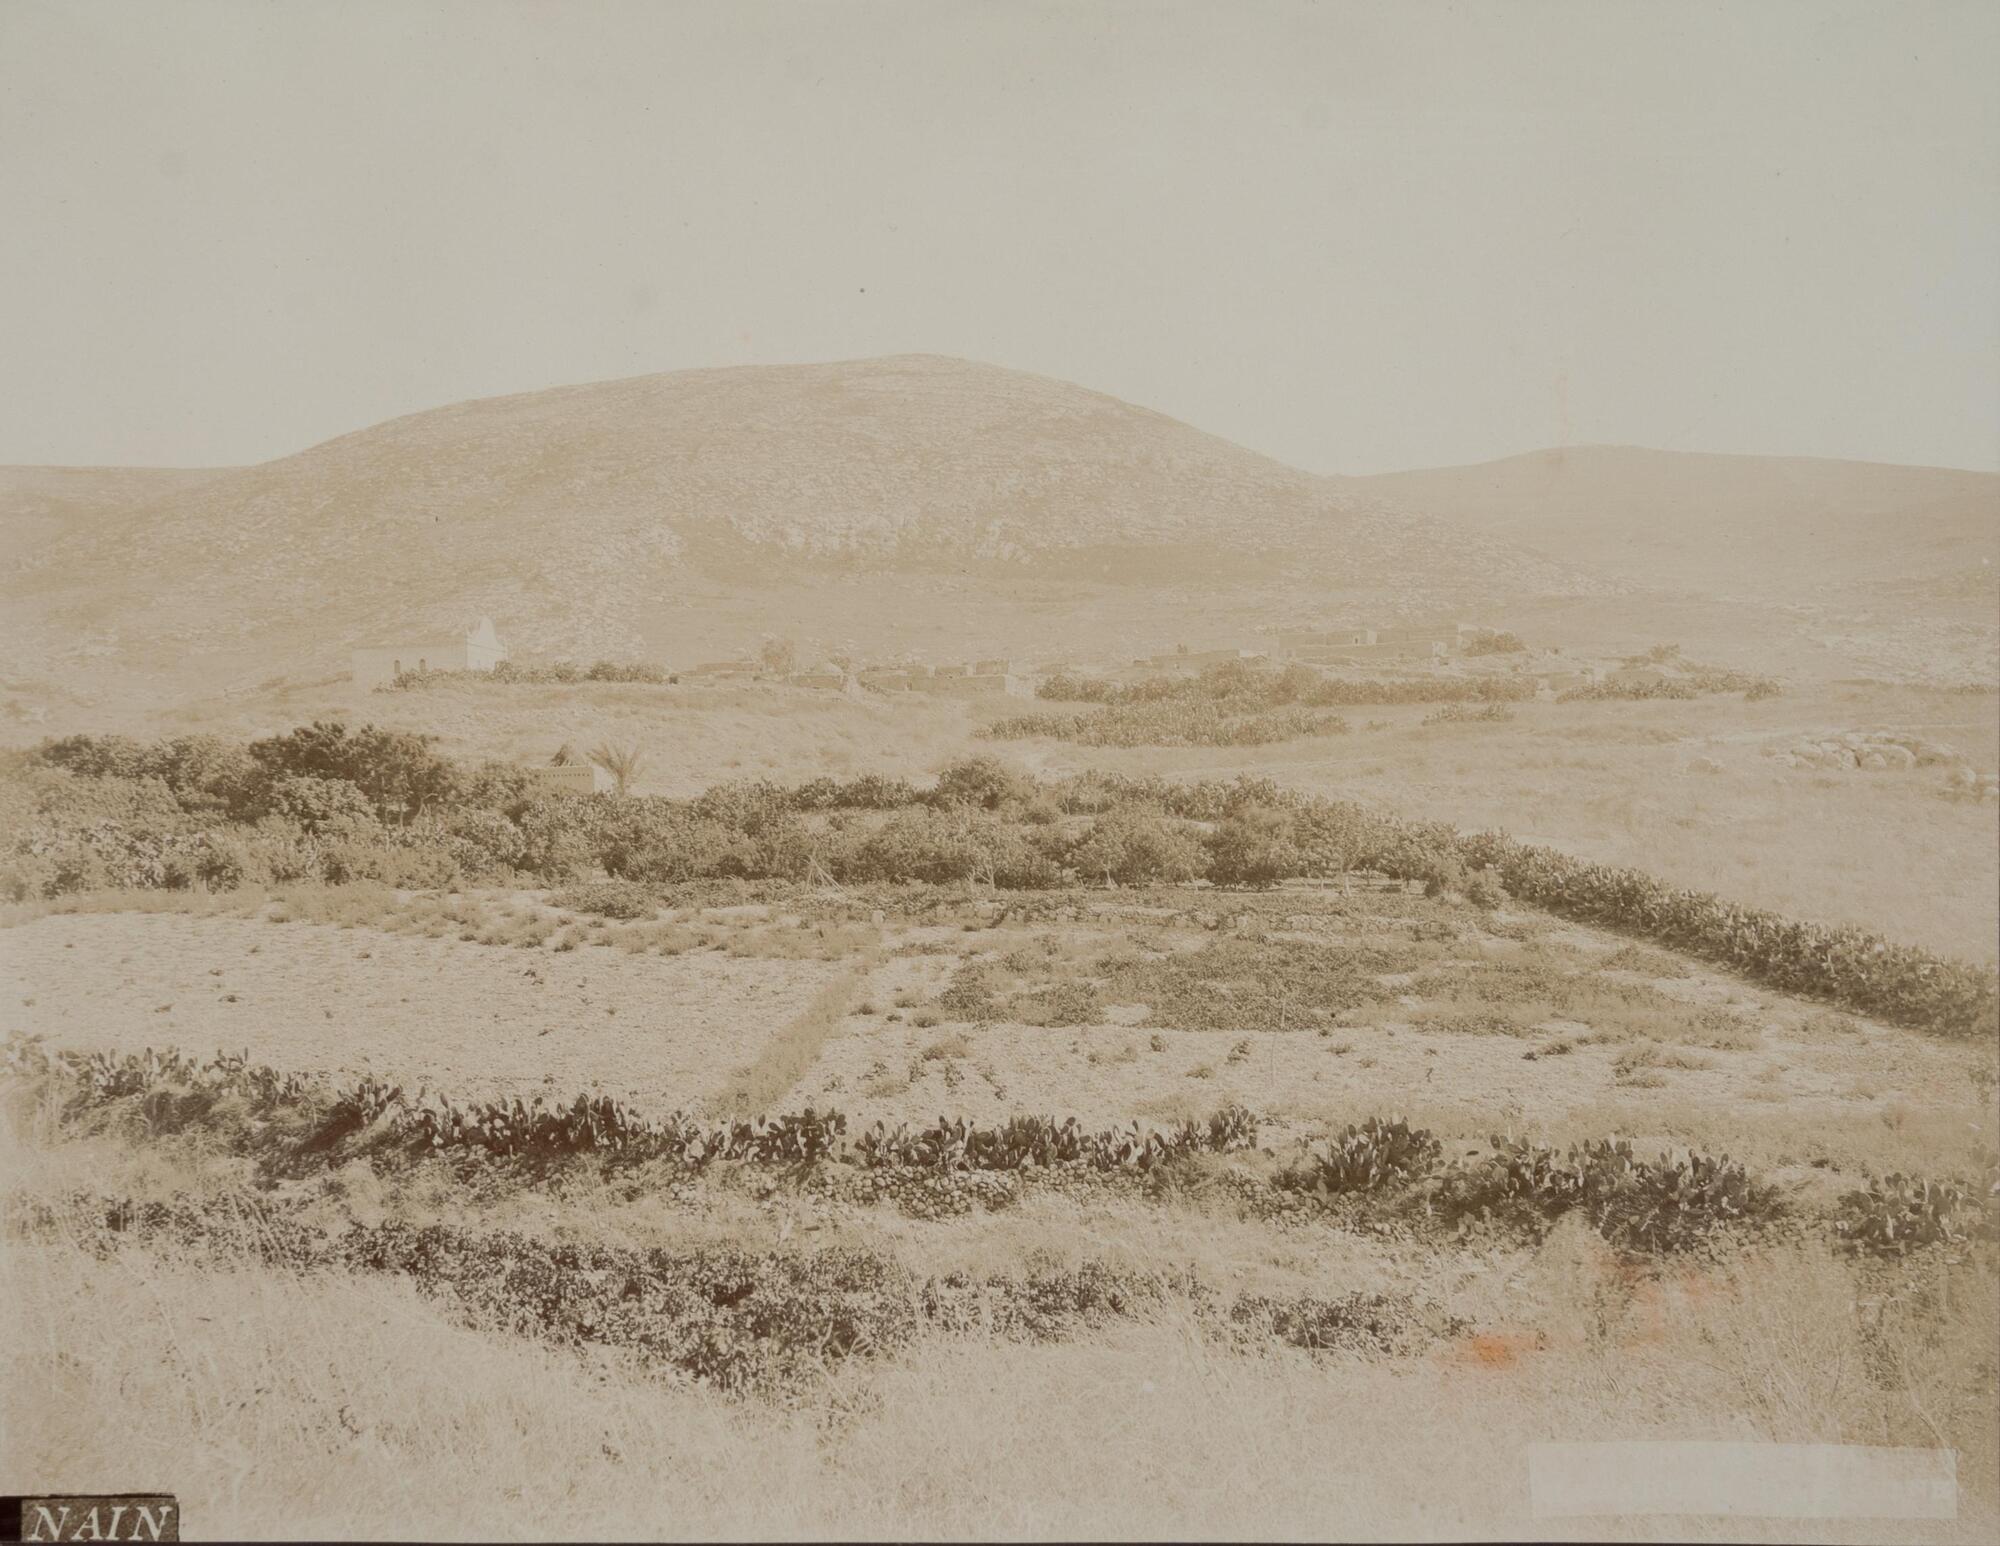 Fields of tall grass, along with trees and other foliage in the foreground recede away from the viewer toward the feet of the hills in the background. Two-thirds up from the bottom of the photograph, a small grouping of flat rooftops suggest a small settlement. 